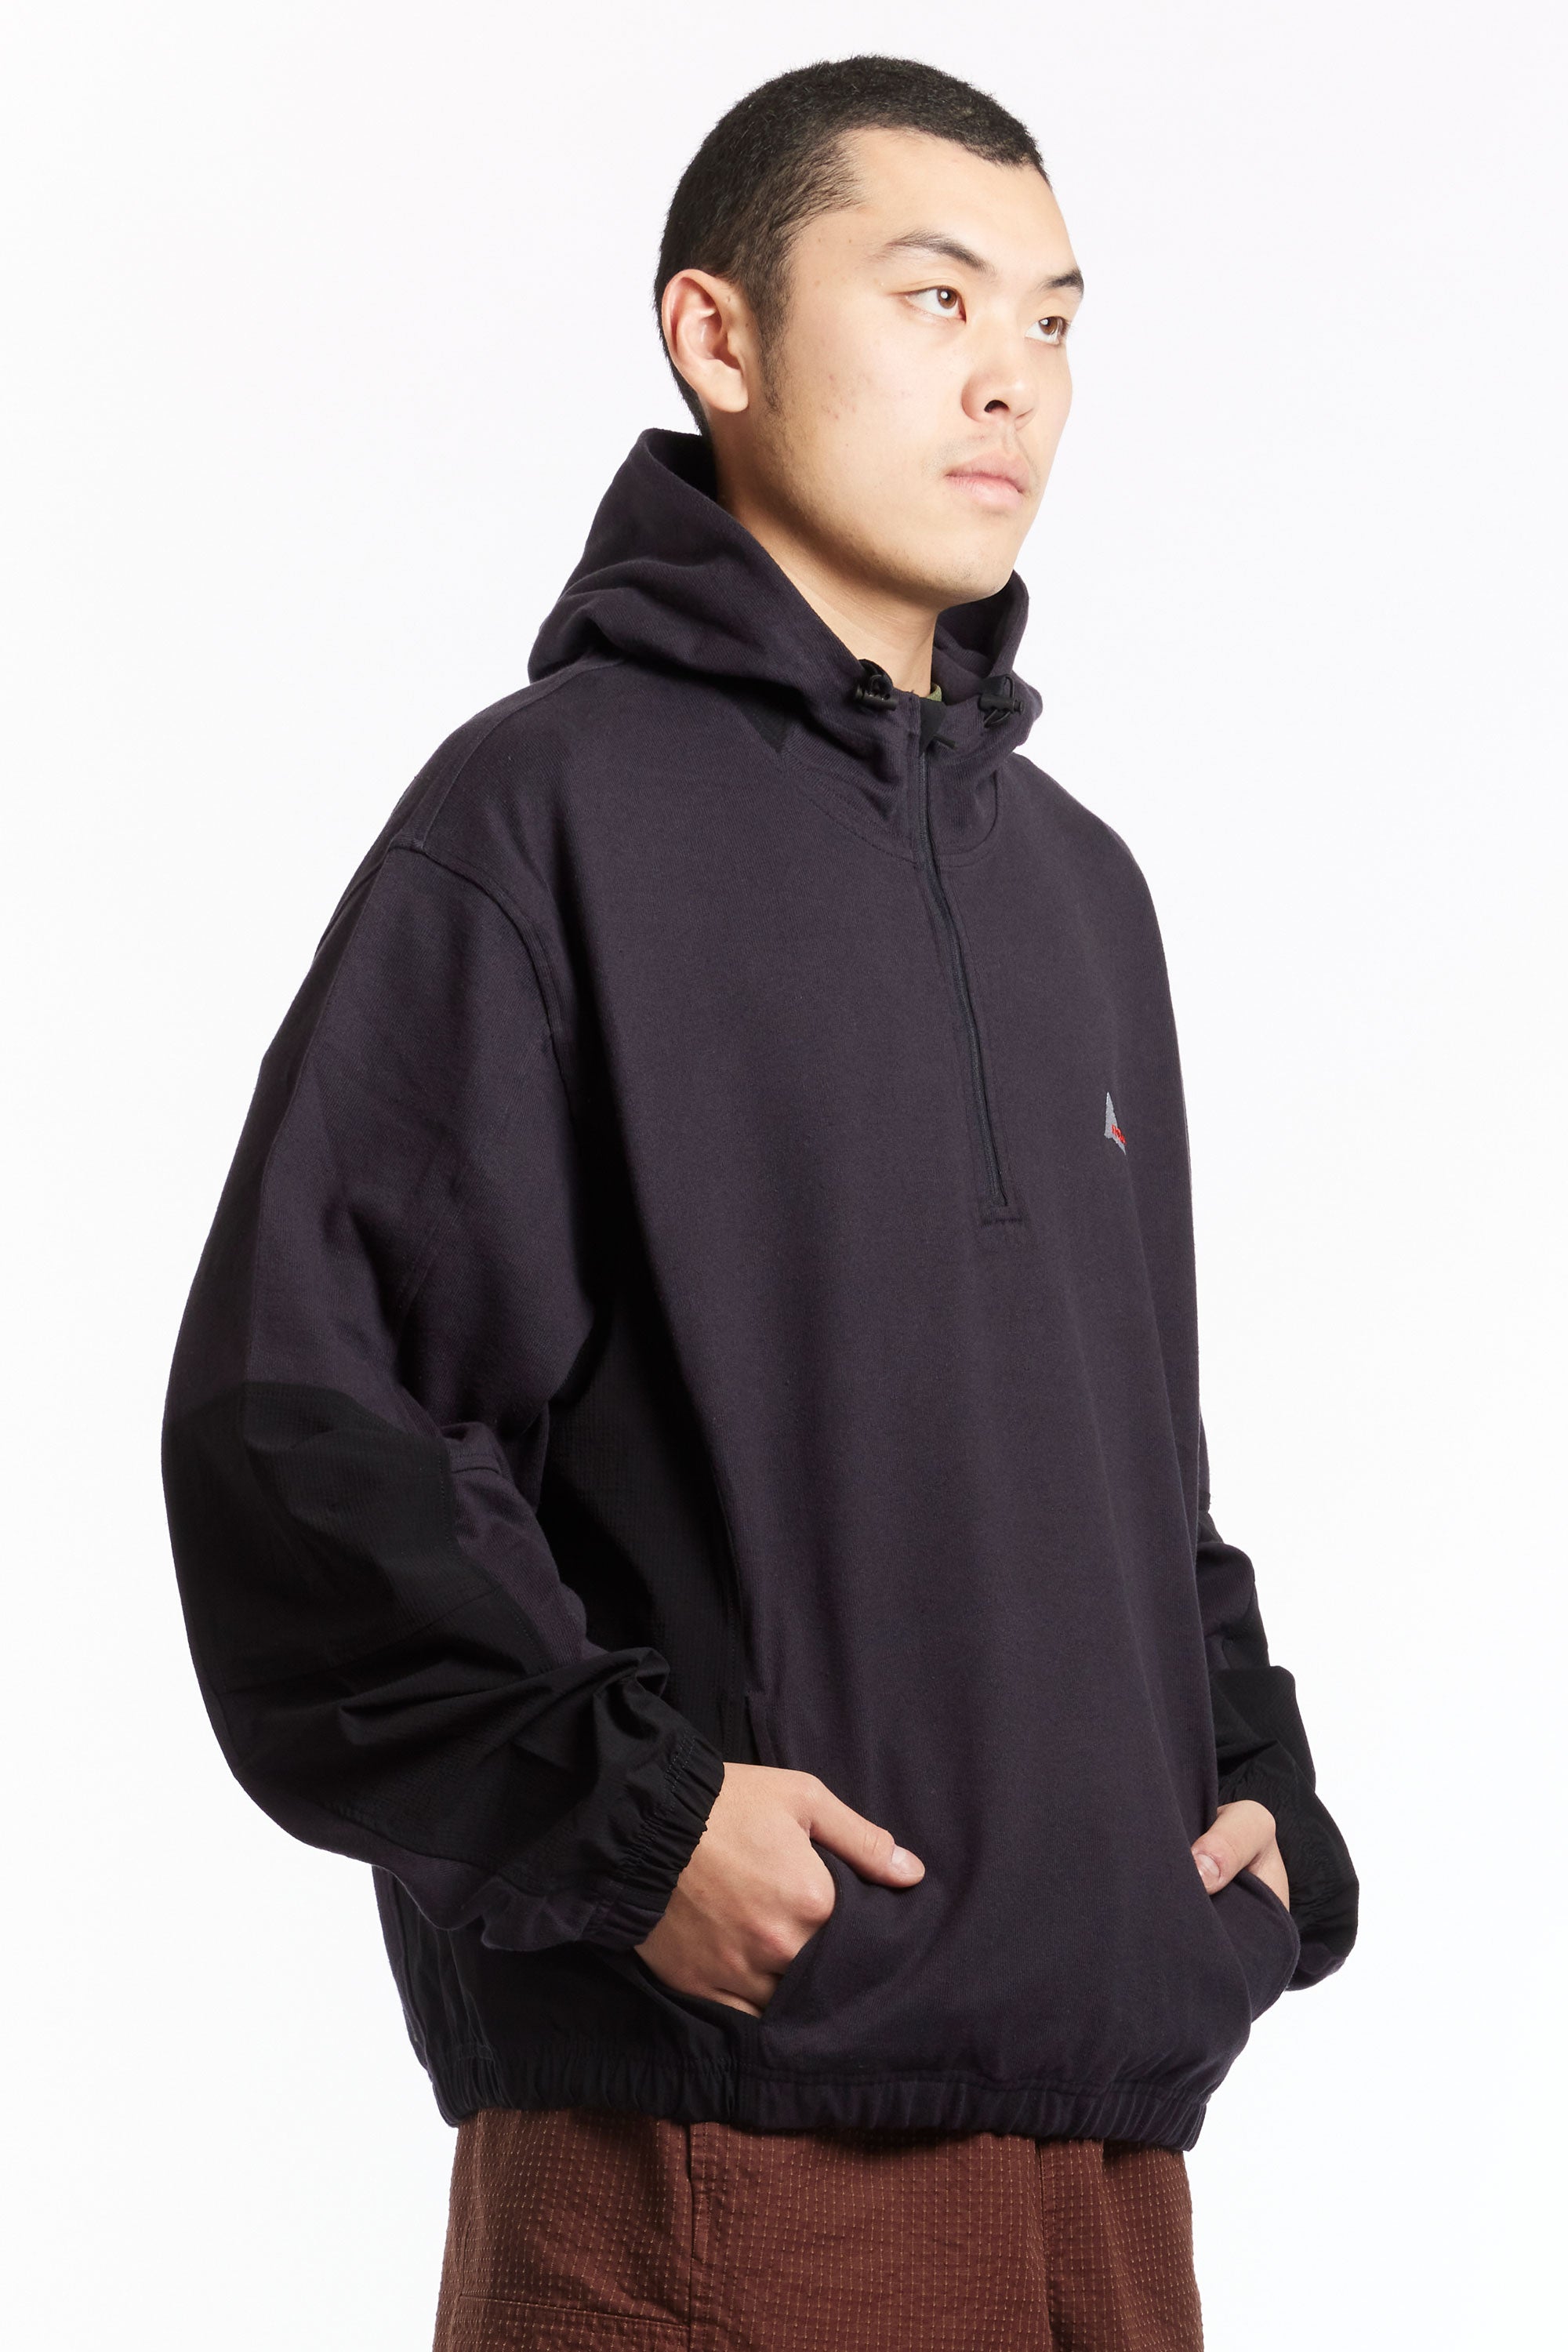 The ROA - PANELED HOODIE  available online with global shipping, and in PAM Stores Melbourne and Sydney.